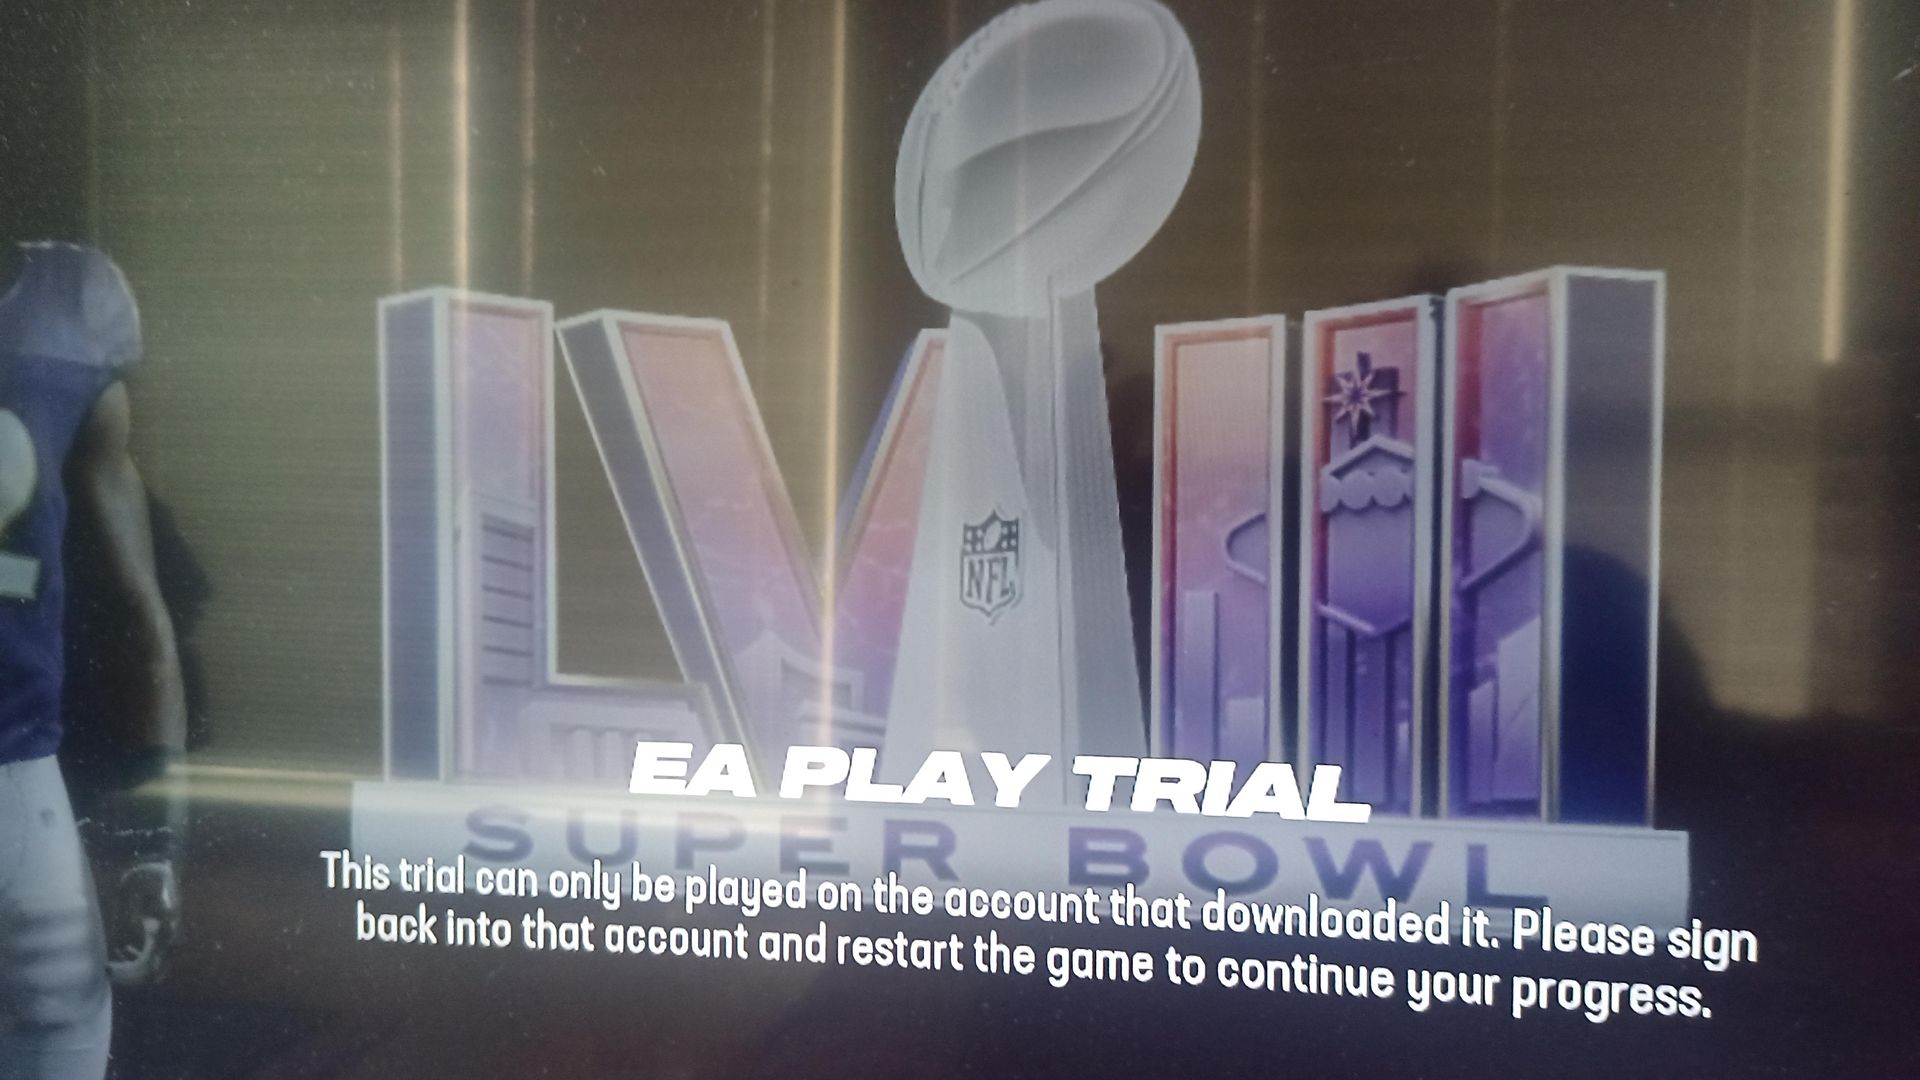 Madden 24 game pass not working: How to fix it